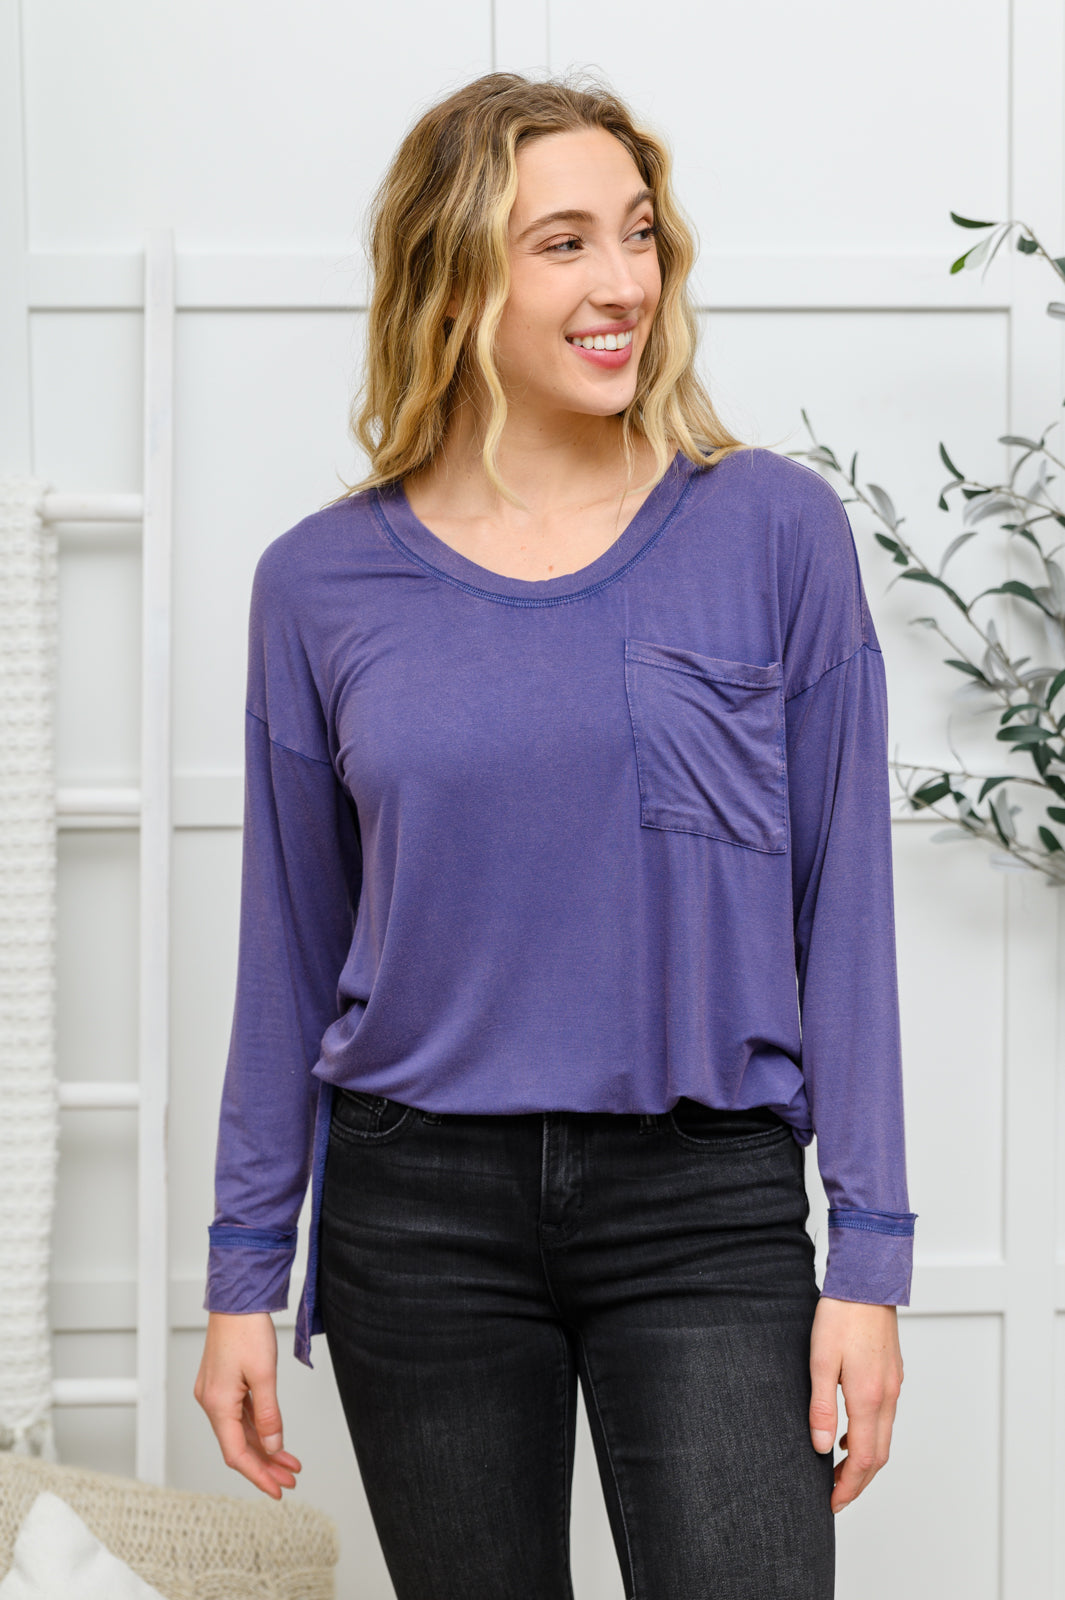 Long Sleeve Knit Top With Pocket In Denim Blue Womens Southern Soul Collectives 